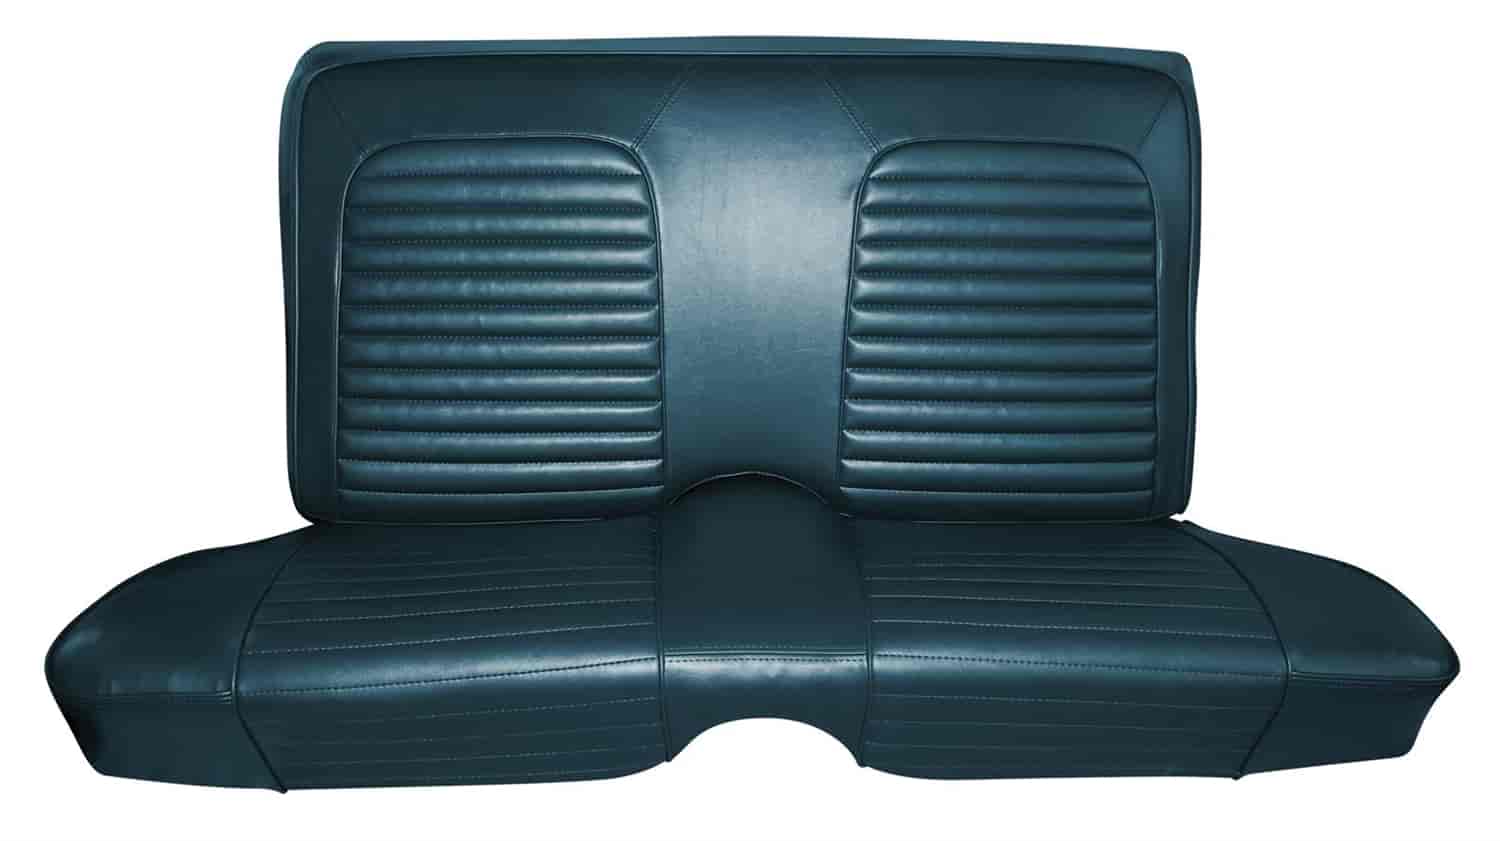 1964 Ford Falcon Futura Convertible Two-Tone Deluxe Interior Front Bucket and Rear Bench Seat Upholstery Set